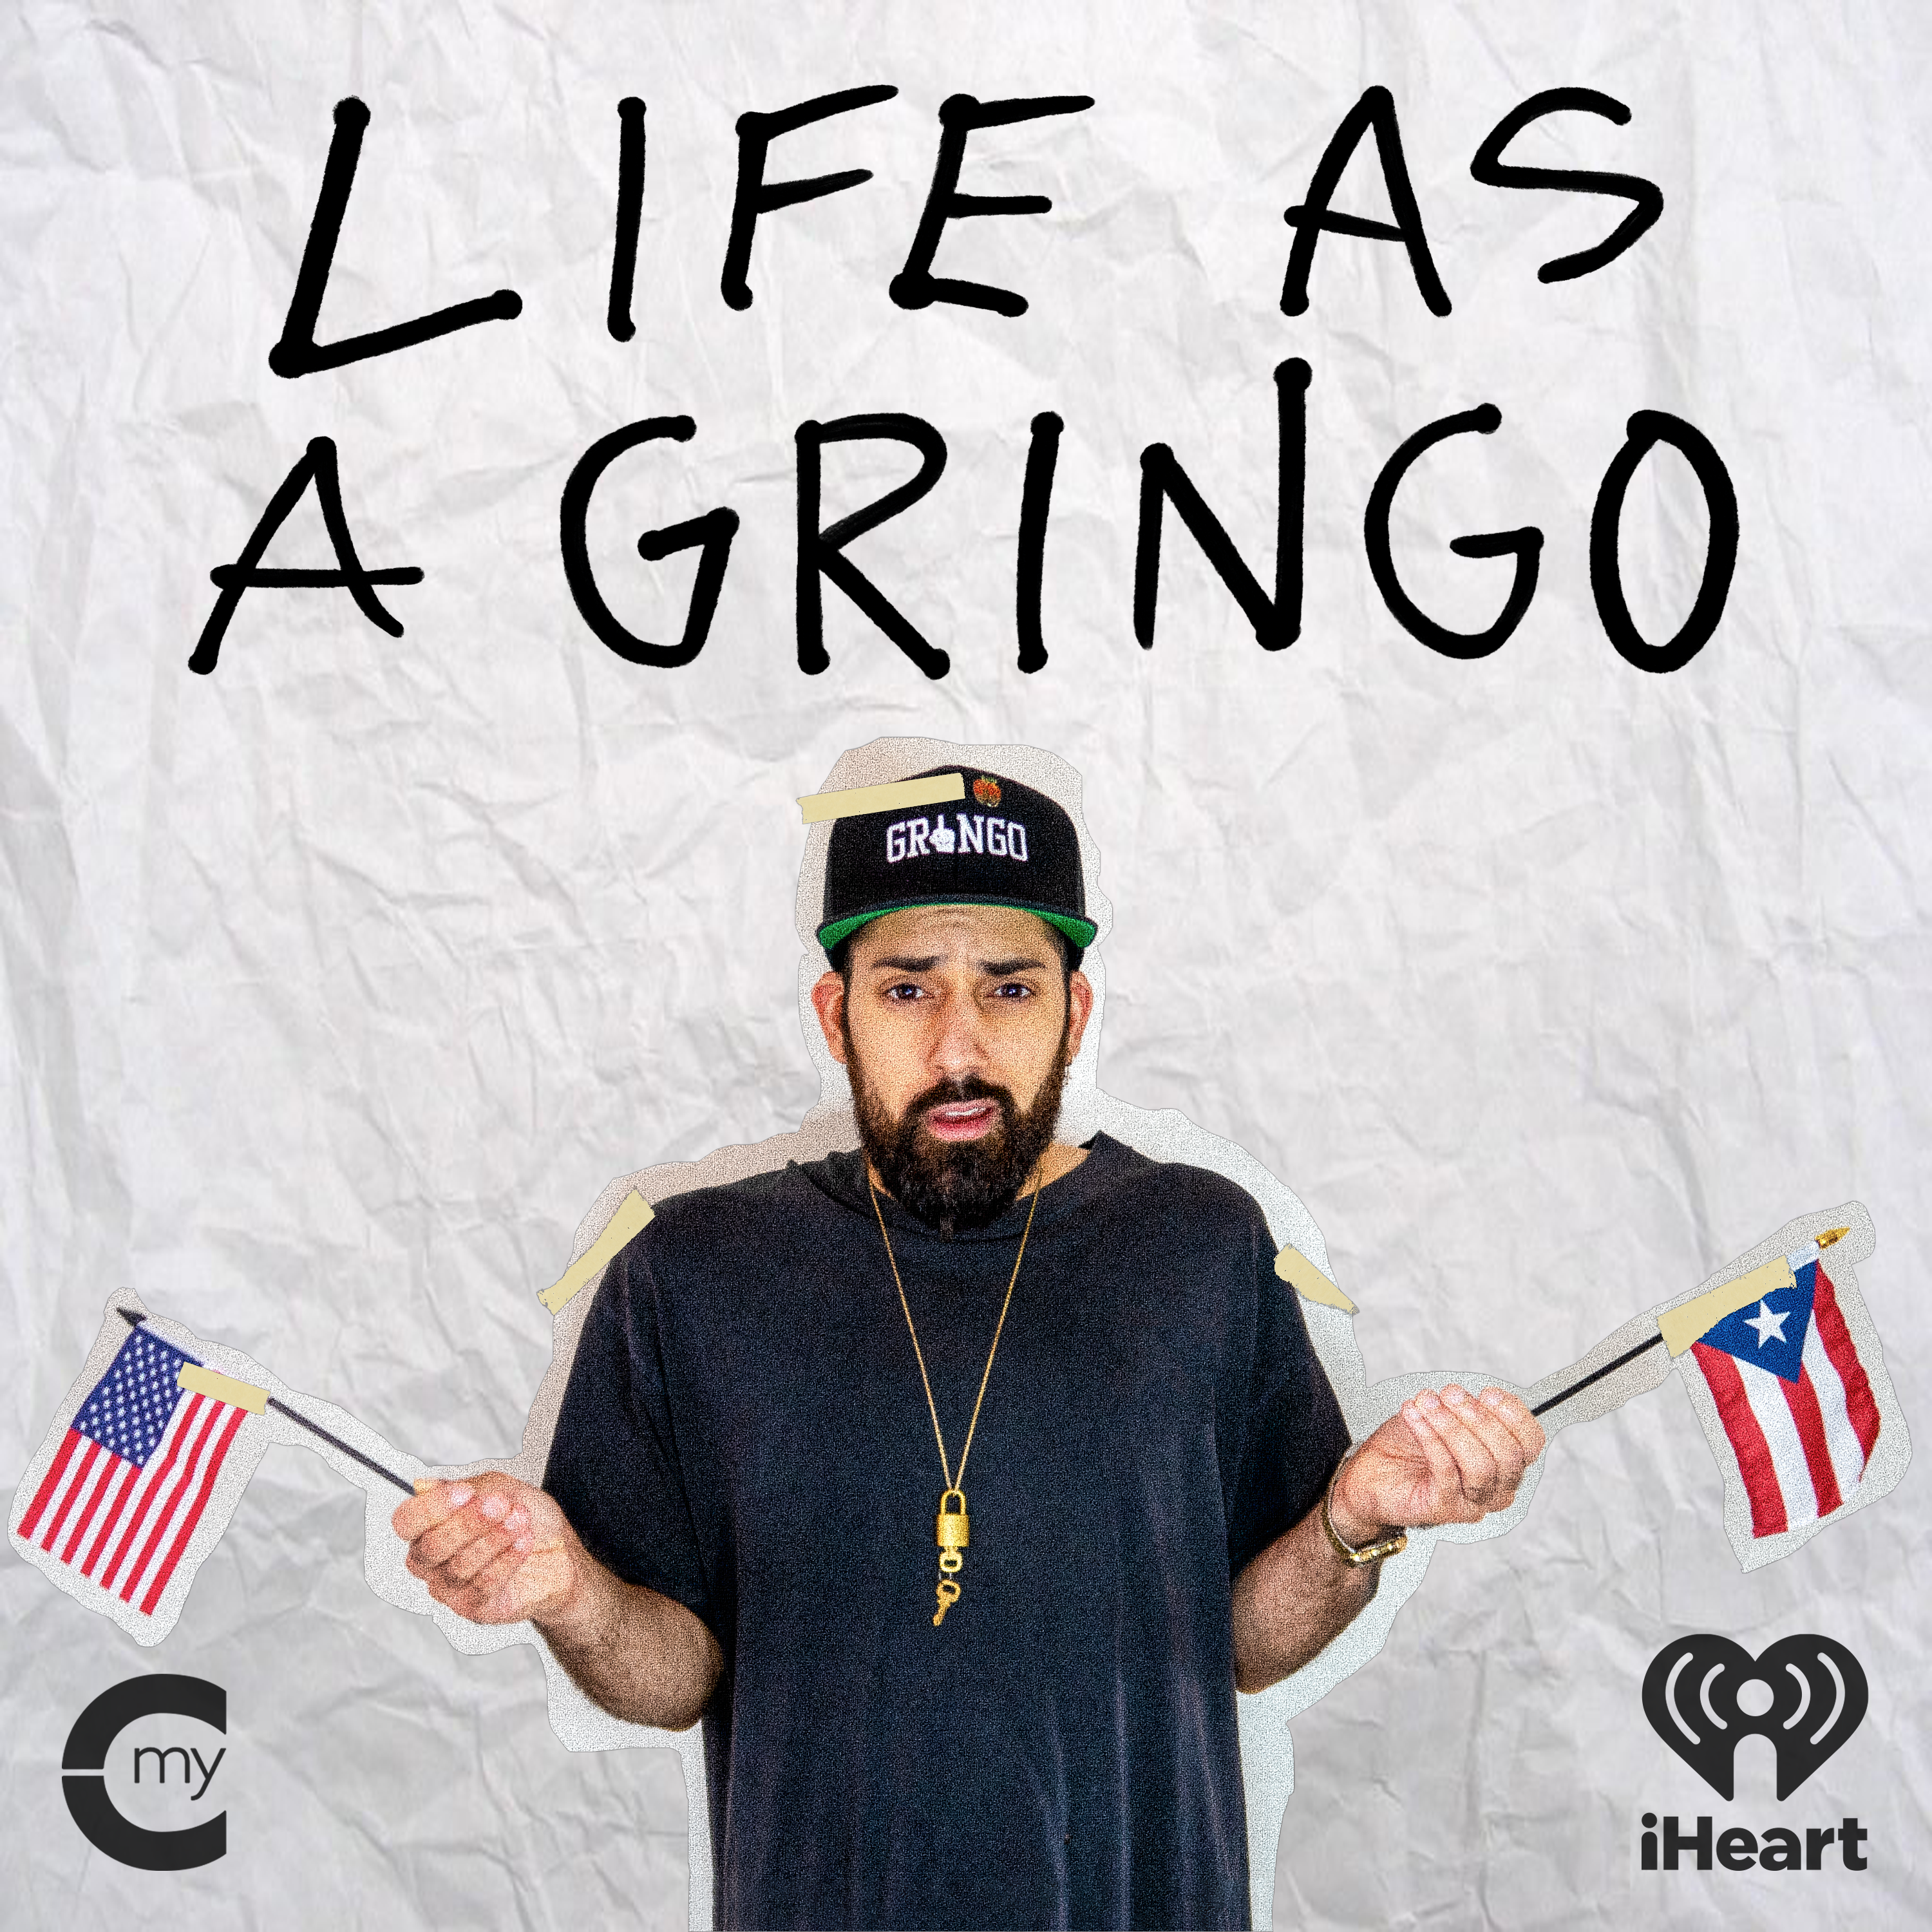 Gringo's Guide To: How The Media Ignores Our Community (LatinX Heritage Month Recap)